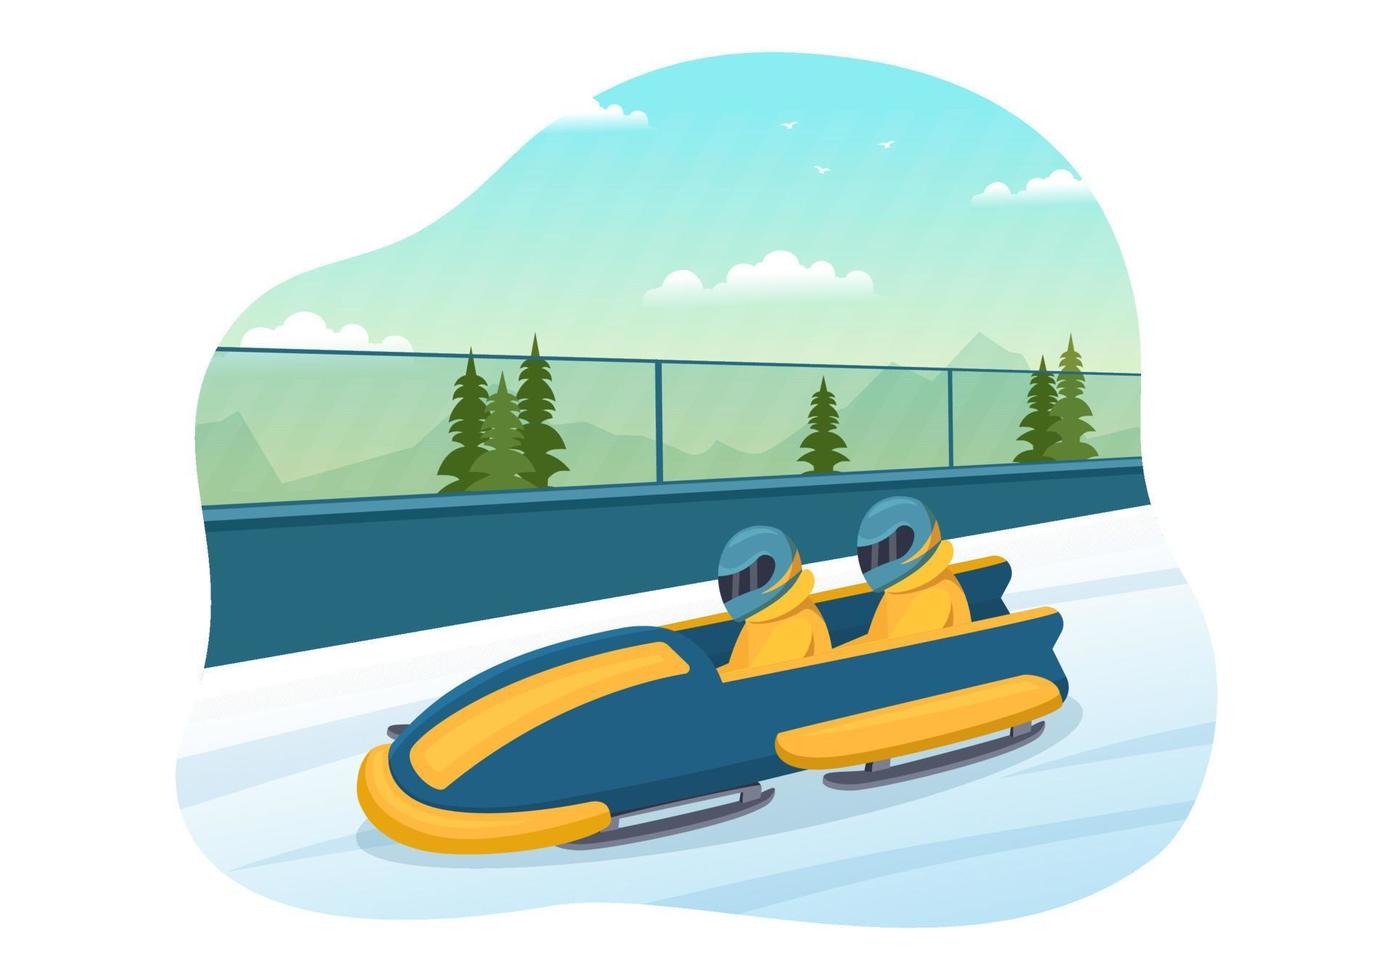 Athlete Riding Sled Bobsleigh Illustration with Snow, Ice and Bobsled Track for Competition in Winter Sport Activity Flat Cartoon Hand Drawn Templates vector